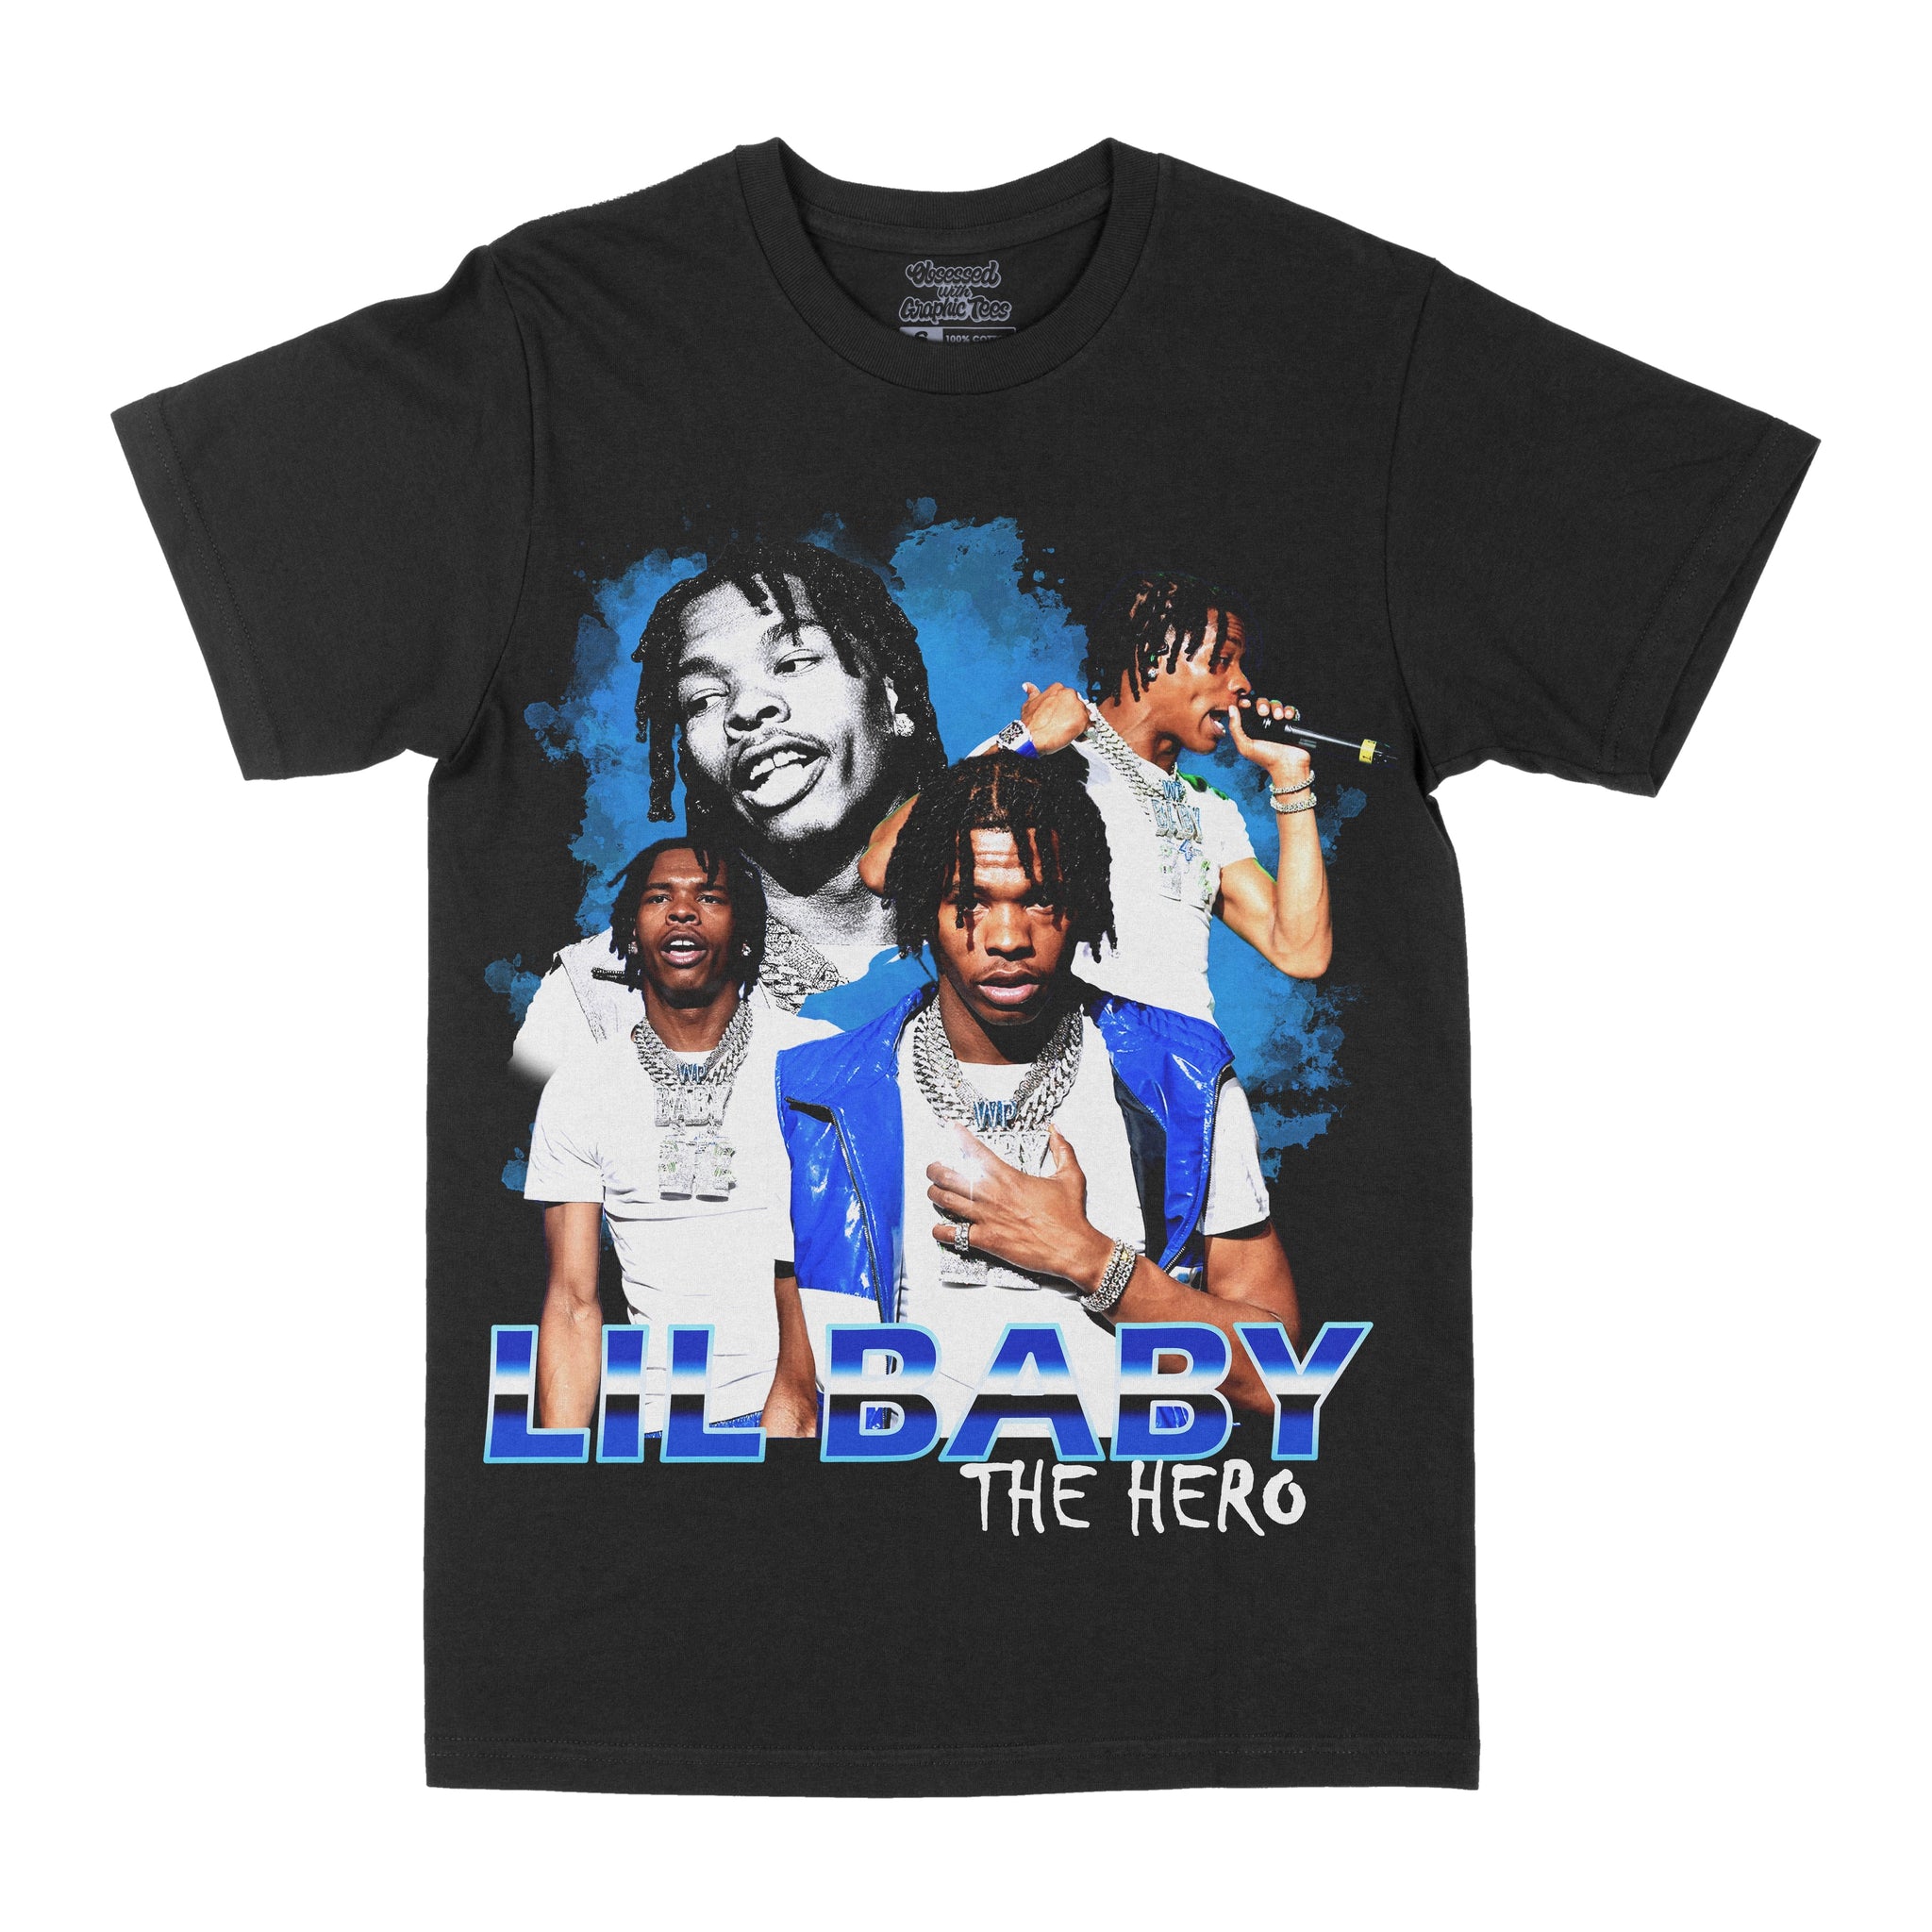 Lil Baby "The Hero" Graphic Tee